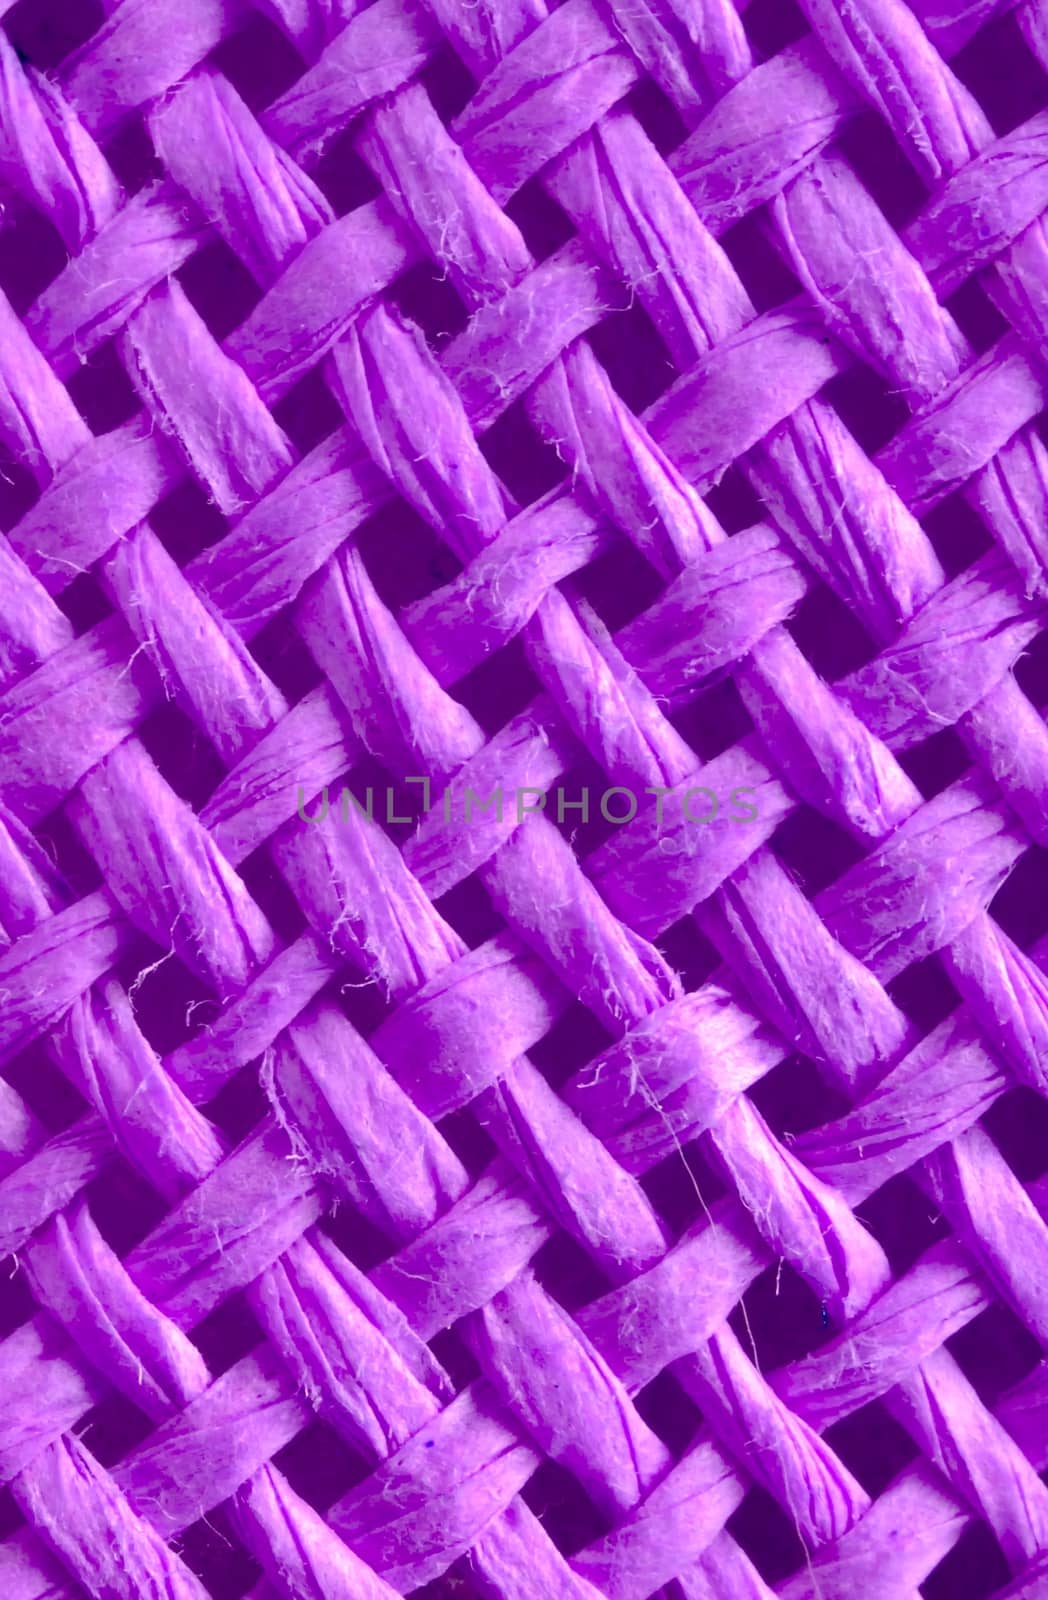 violet wattled abstract background with hole